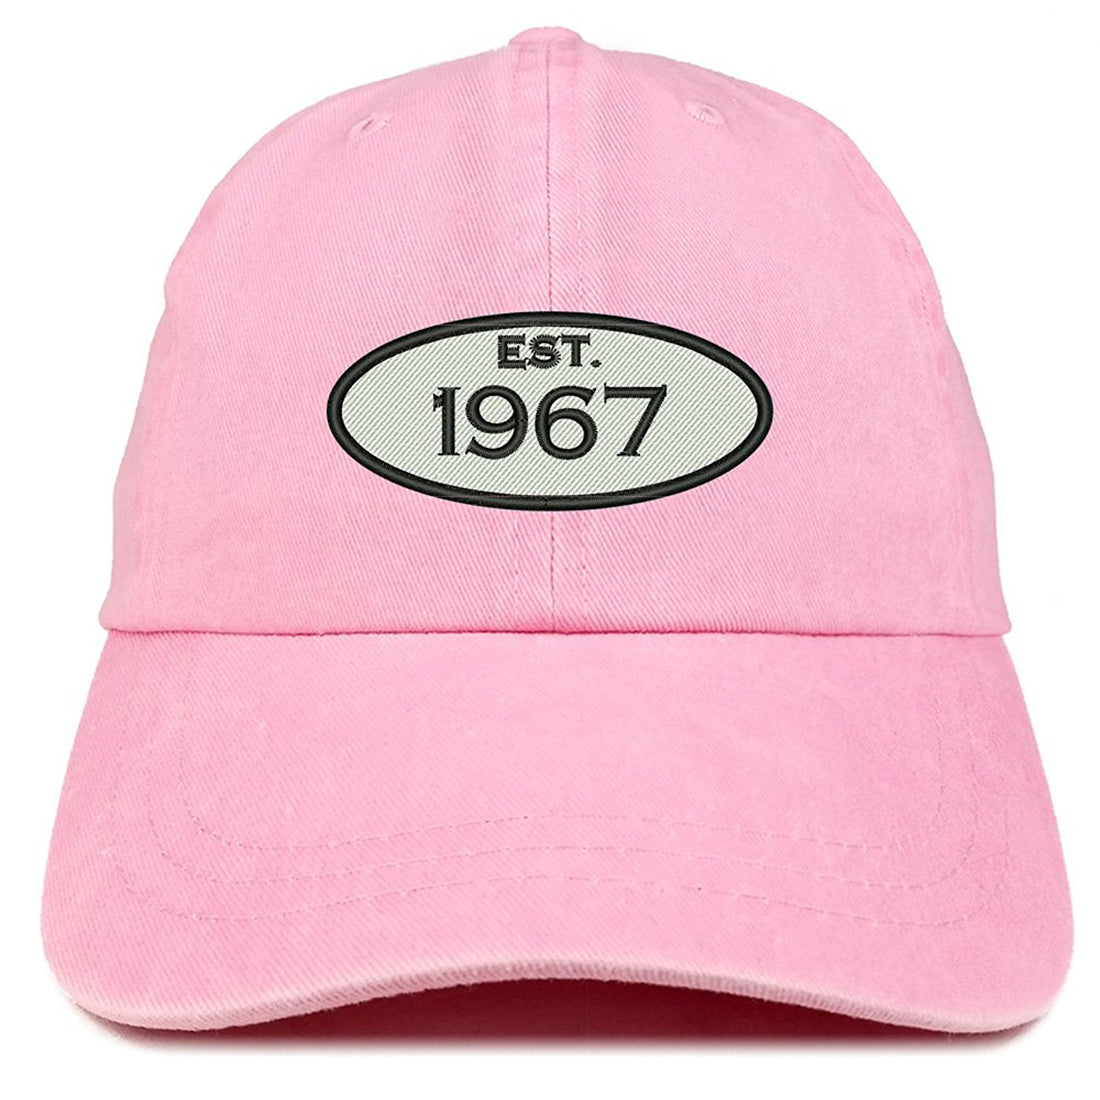 Trendy Apparel Shop Established 1967 Embroidered 52nd Birthday Gift Pigment Dyed Washed Cotton Cap